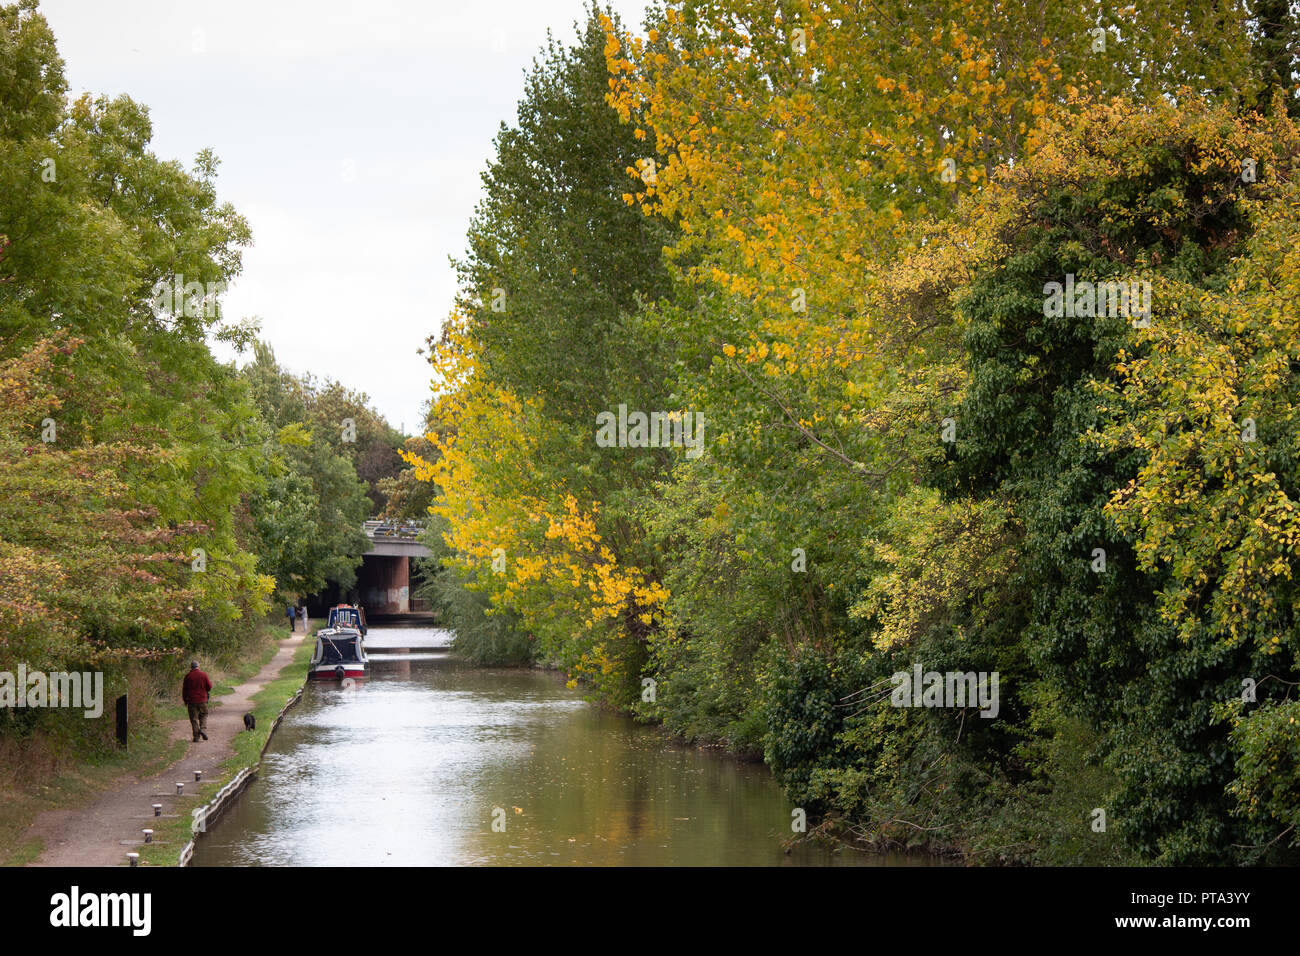 The Coventry canal in Atherstone, North Warwickshire, England. A man walks his dog along the canal near Atherstone Town Centre. Stock Photo